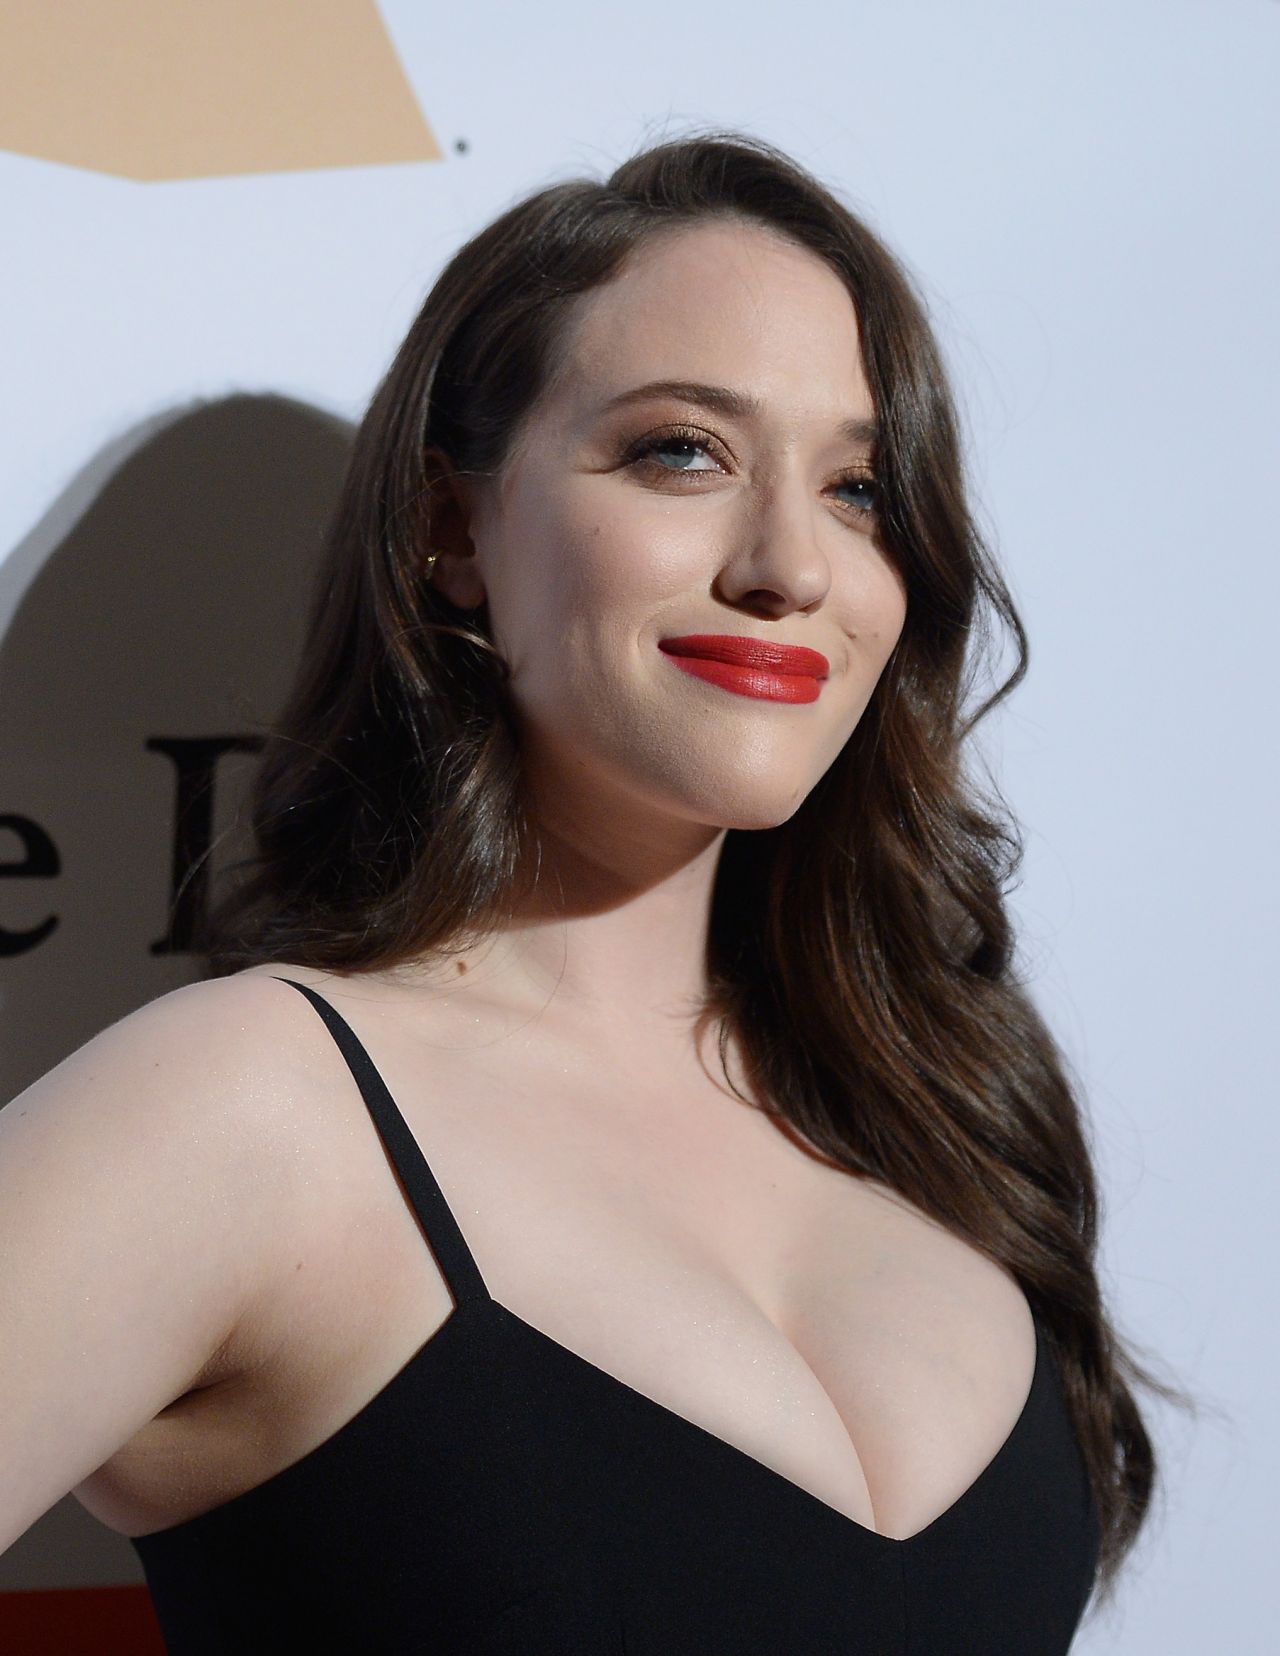 kat-dennings-2016-pre-grammy-gala-and-salute-to-industry-icons-in-beverly-hills-2-14-2016-7.jpg